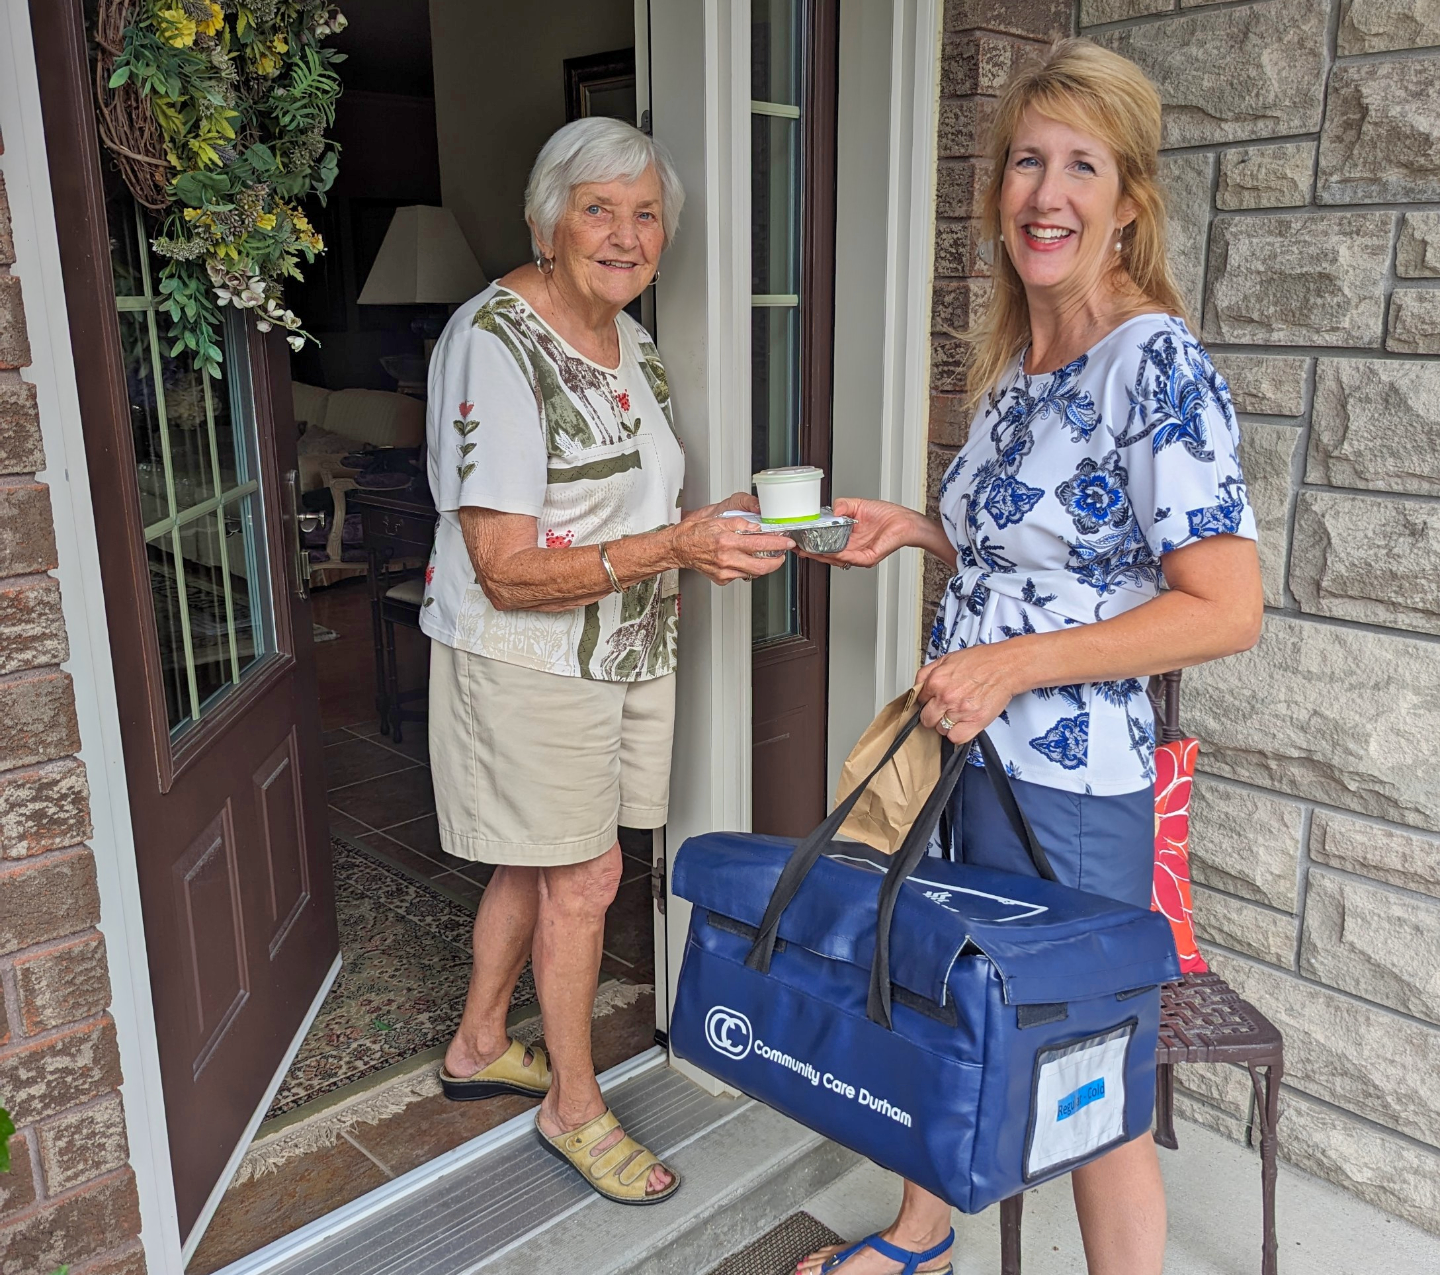 Client accepting Meals on Wheels deliver from volunteer. Both smiling for photo.